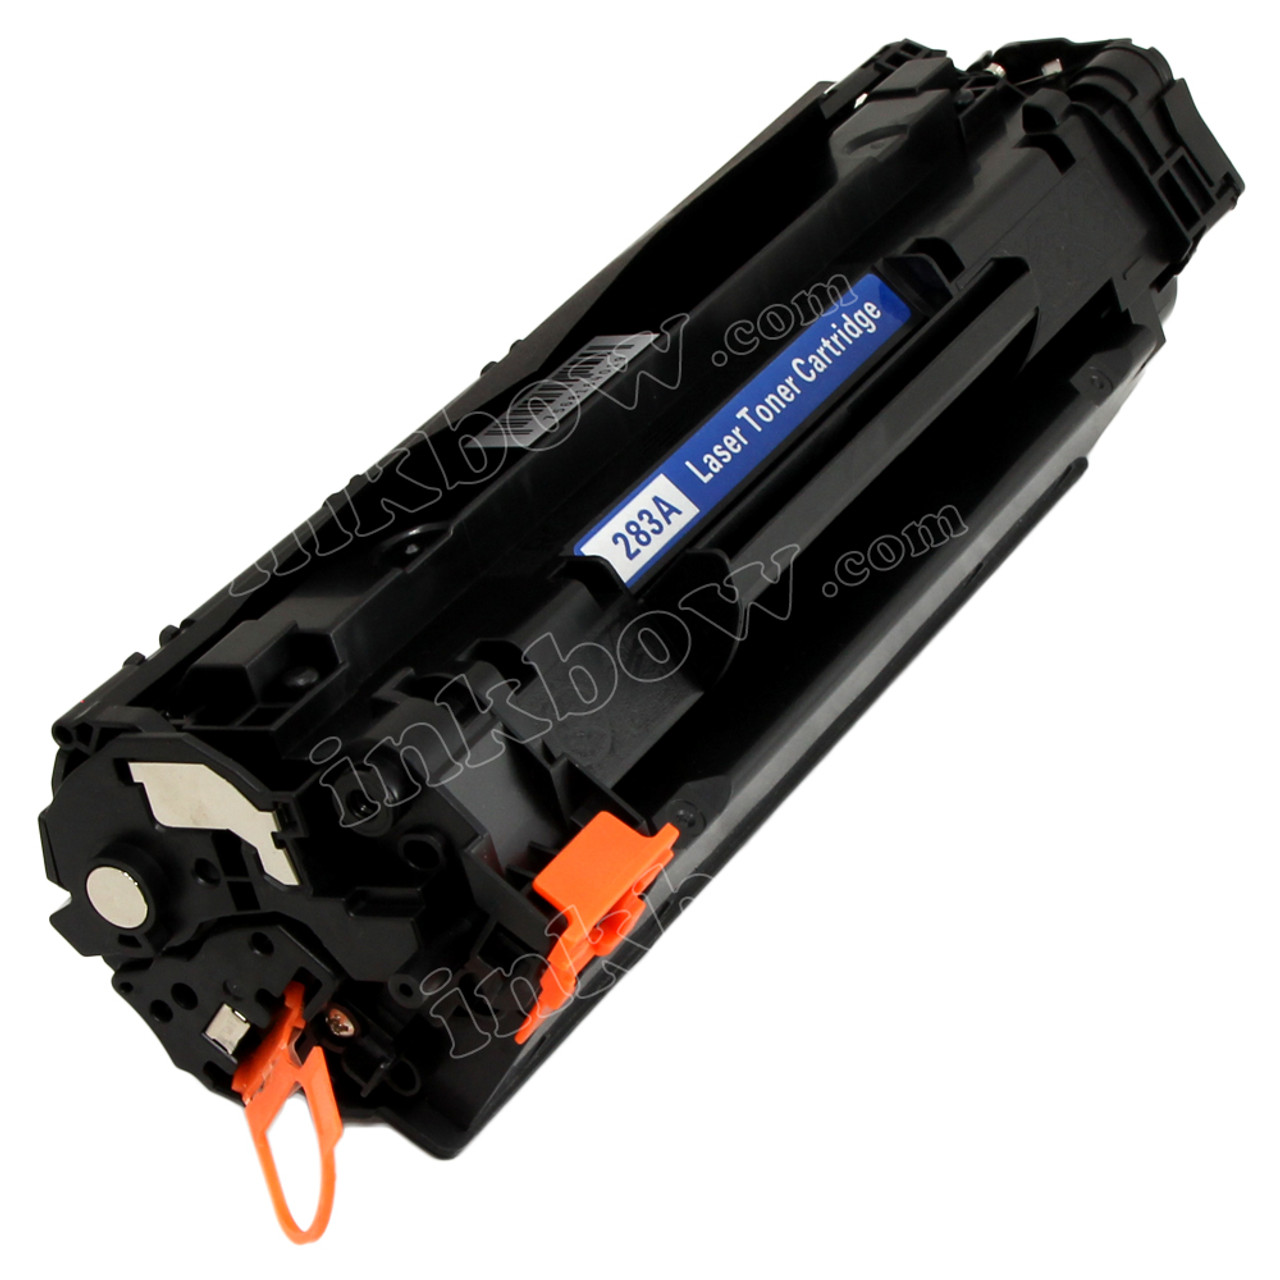 Where to Buy Cheap Compatible HP 83A Black Toner Cartridge in Singapore |  HP CF283A Price